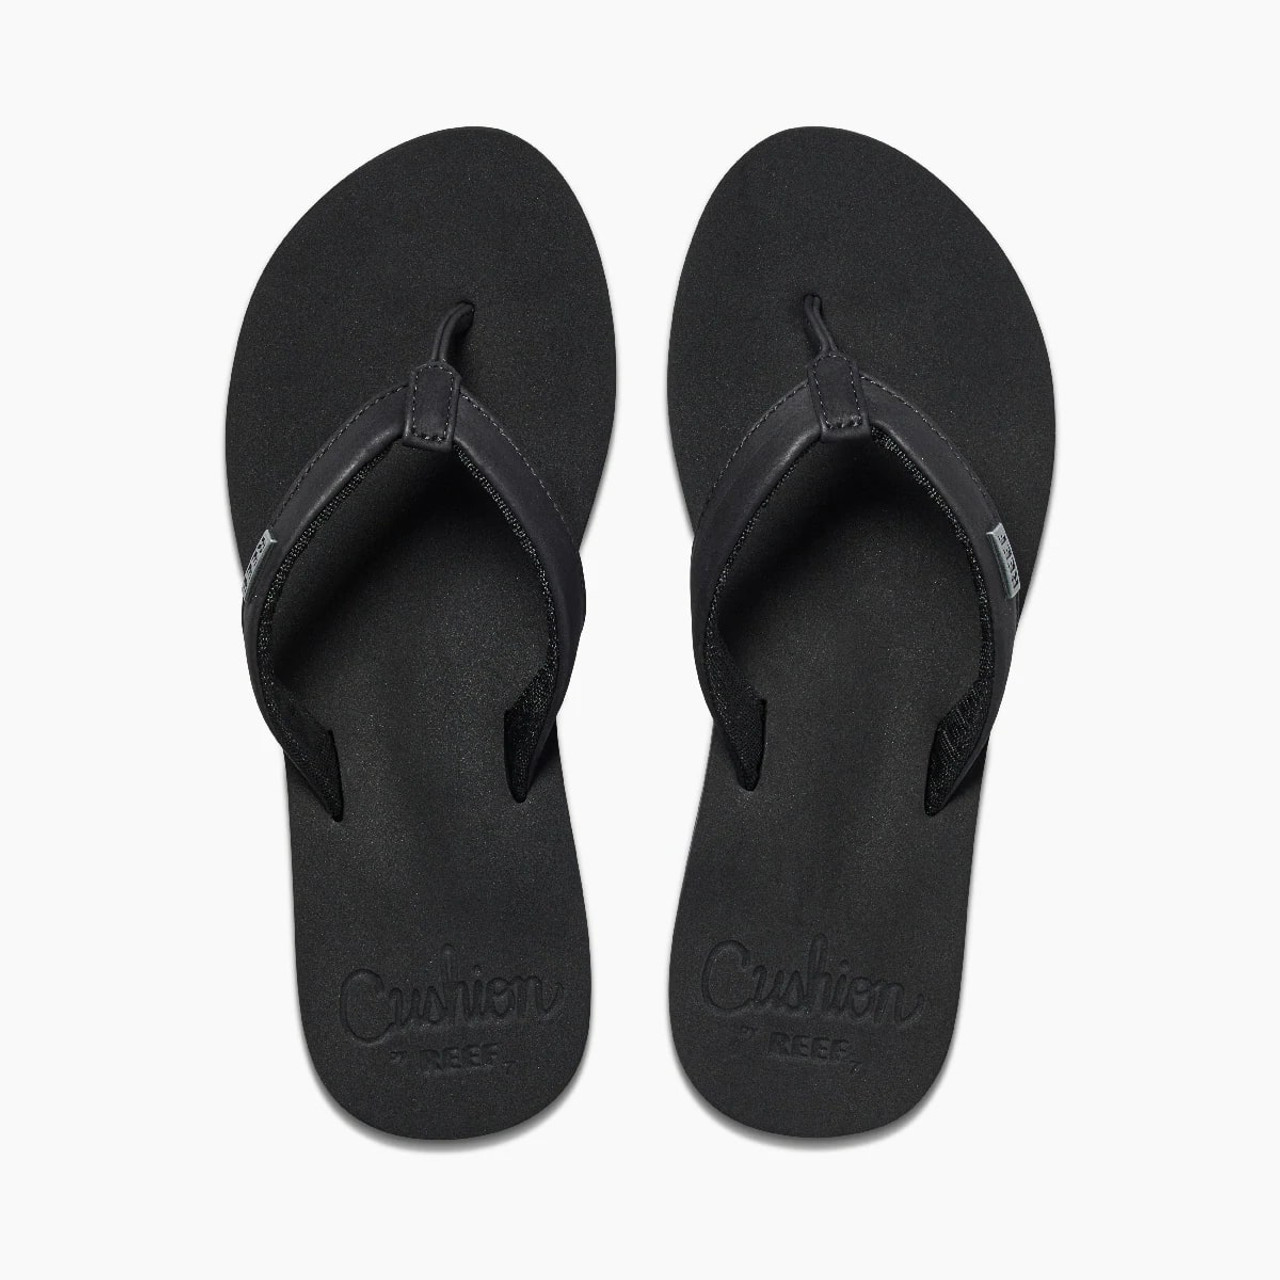 Reef Cushion Sandals 2021 - Getboards Ride